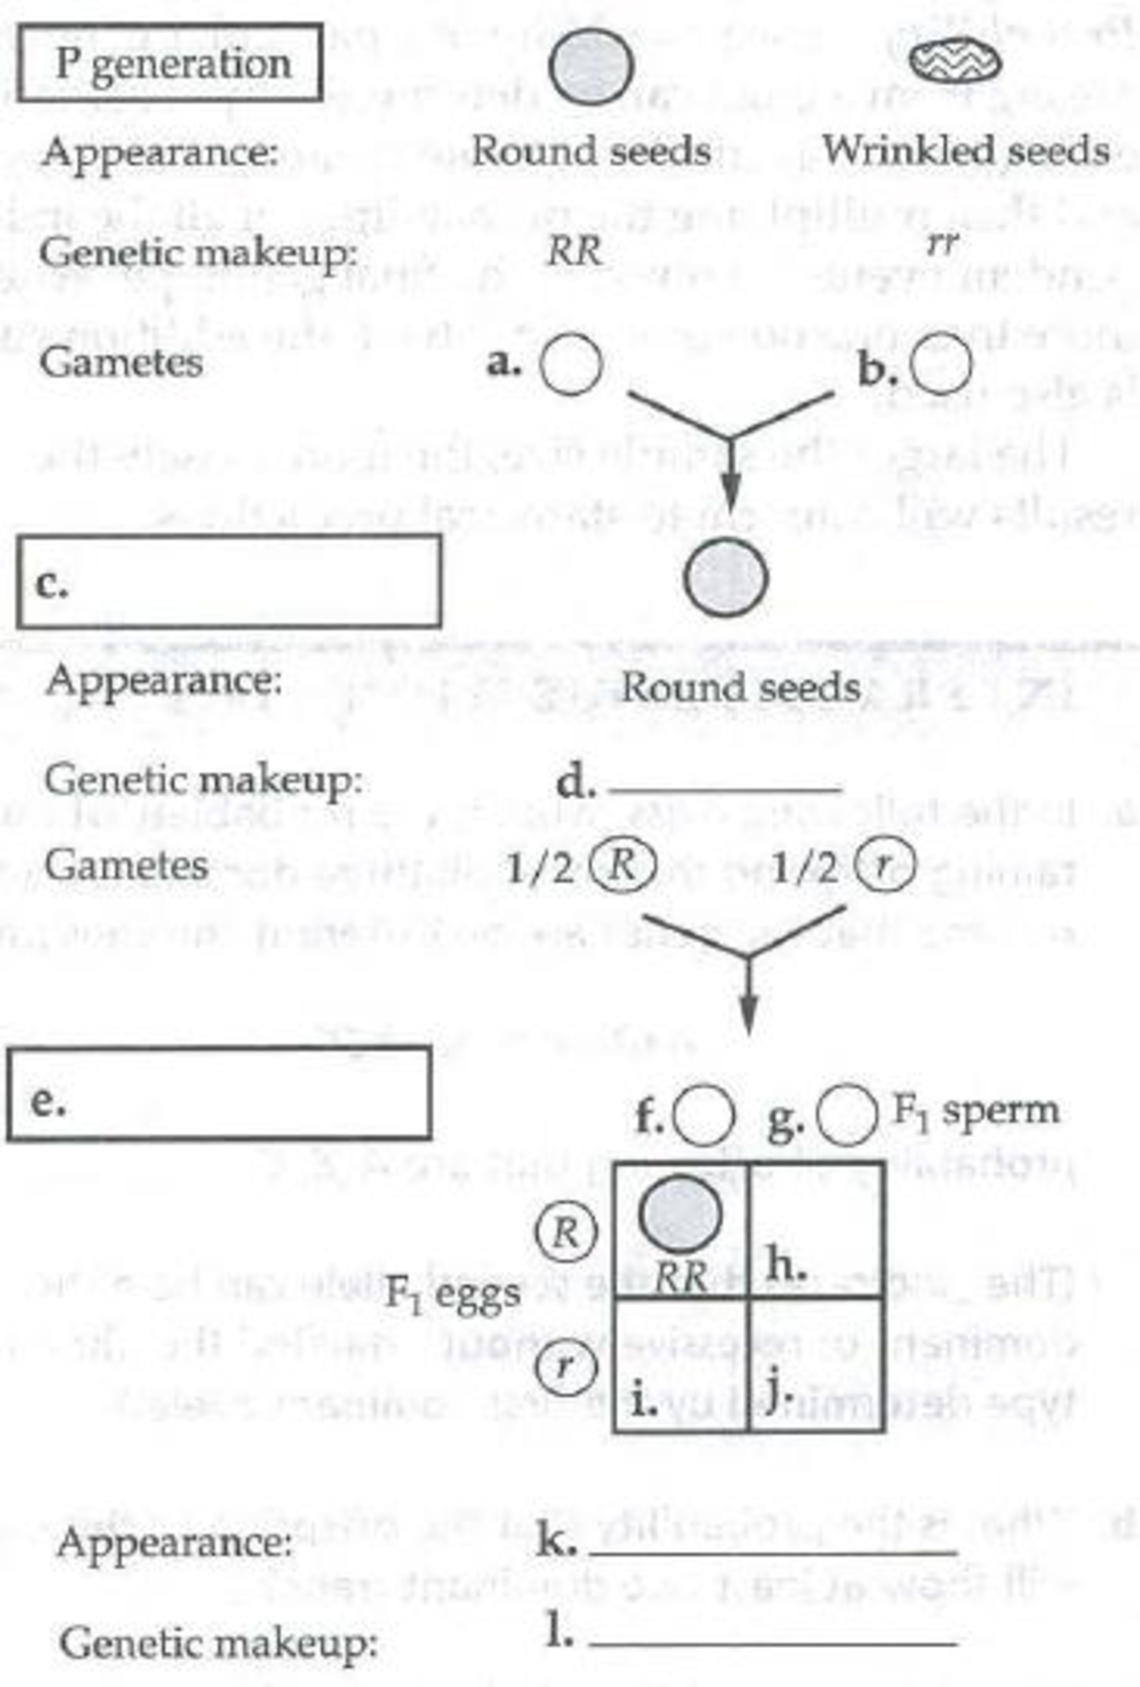 Chapter 14, Problem 1IQ, Fill in the following diagram of a cross of round-seeded and wrinkled-seeded pea plants. The round 